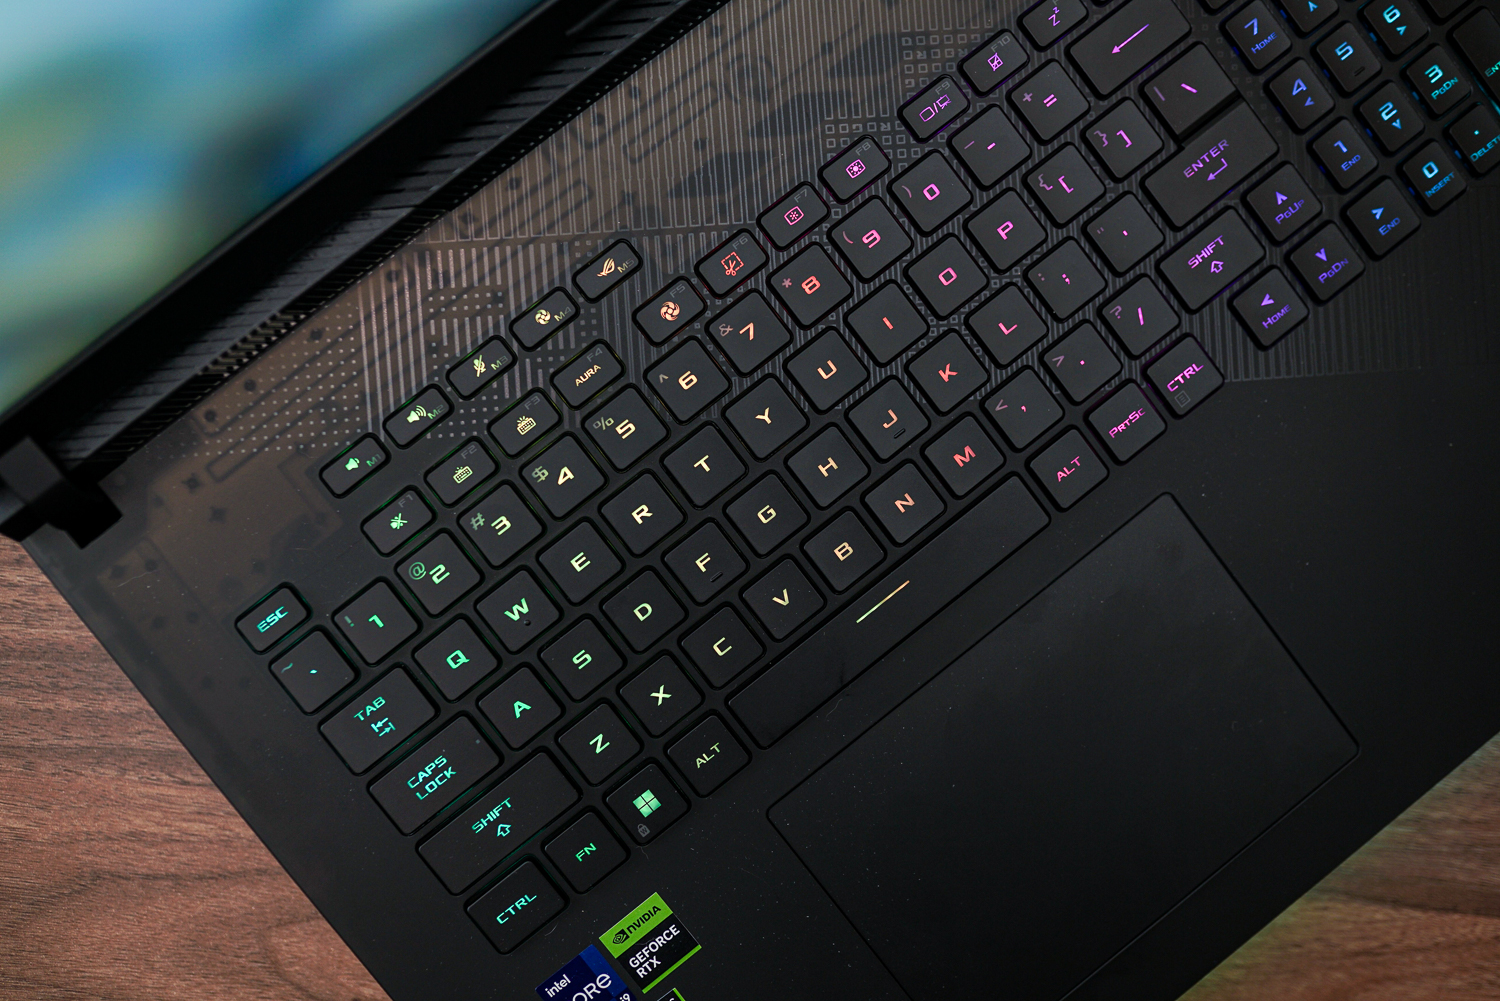 Asus ROG Strix 18 review: Tremendously powerful and luxuriously big